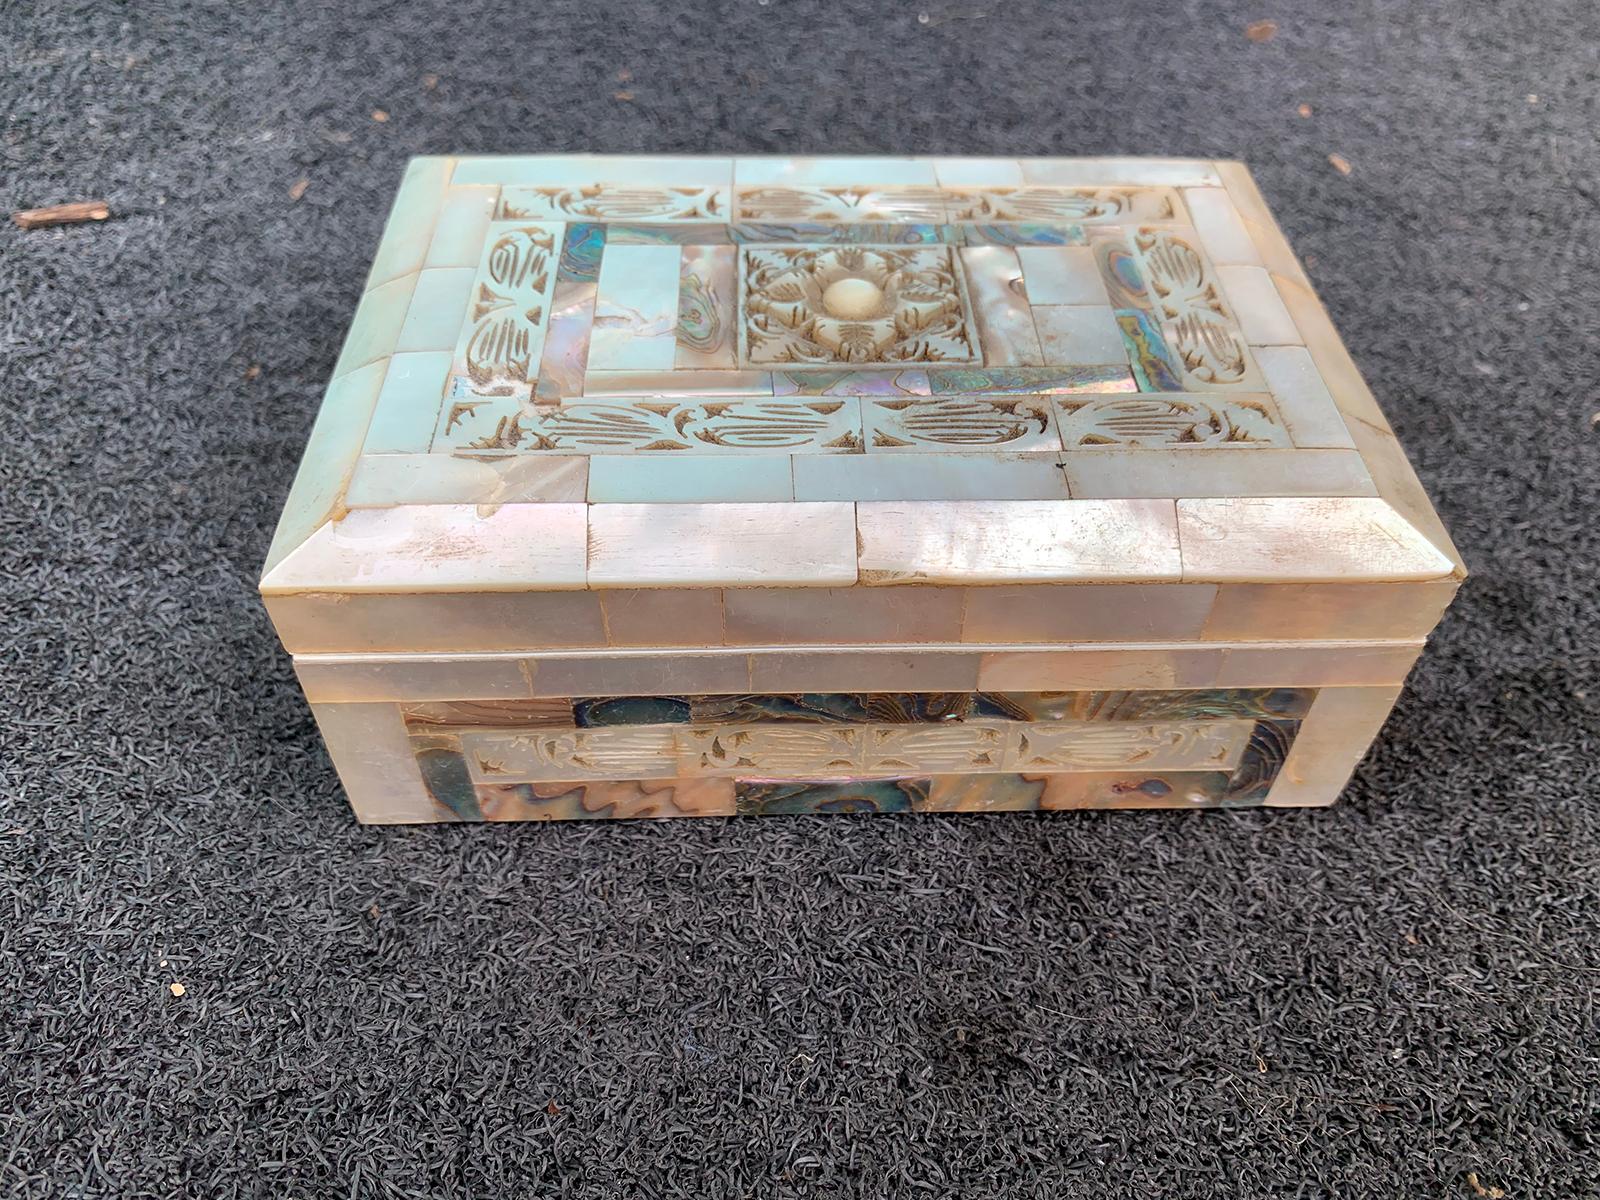 Two similar Anglo-Indian Visakhapatnam mother of pearl inlaid boxes, circa 1920-1930s
Measures: Rectangular: 5.5